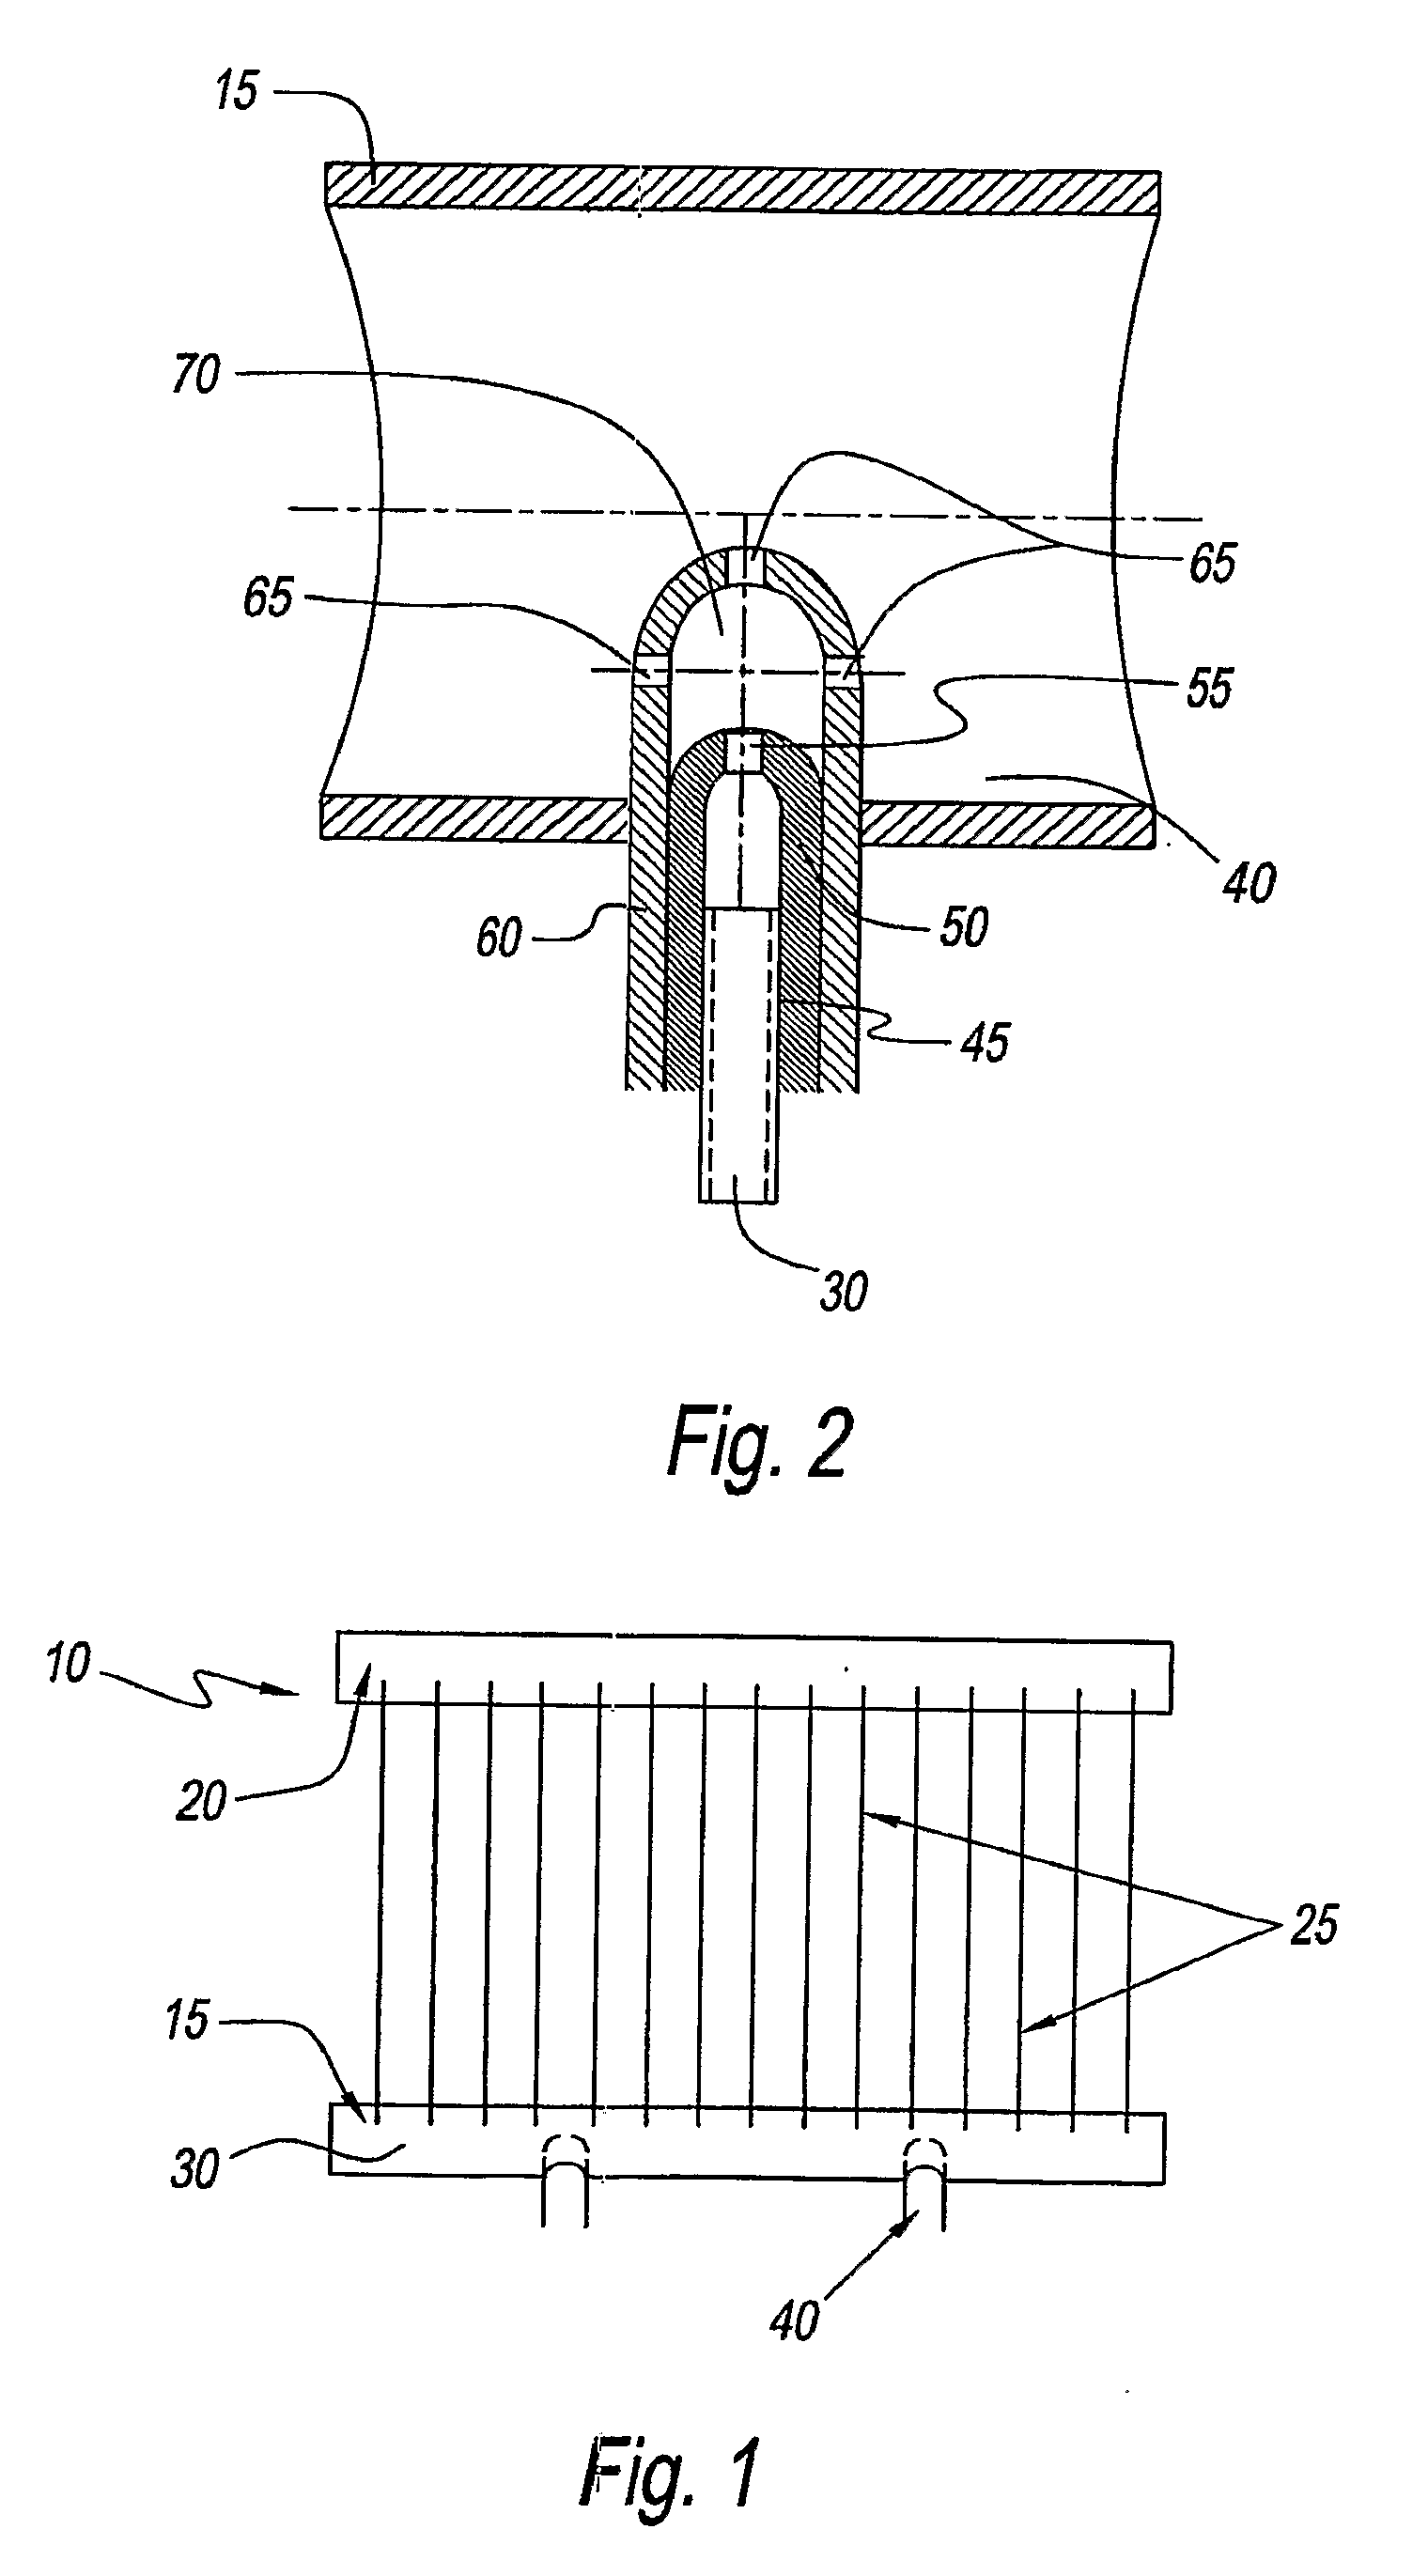 Multi-channel heat exchanger with multi-stage expansion